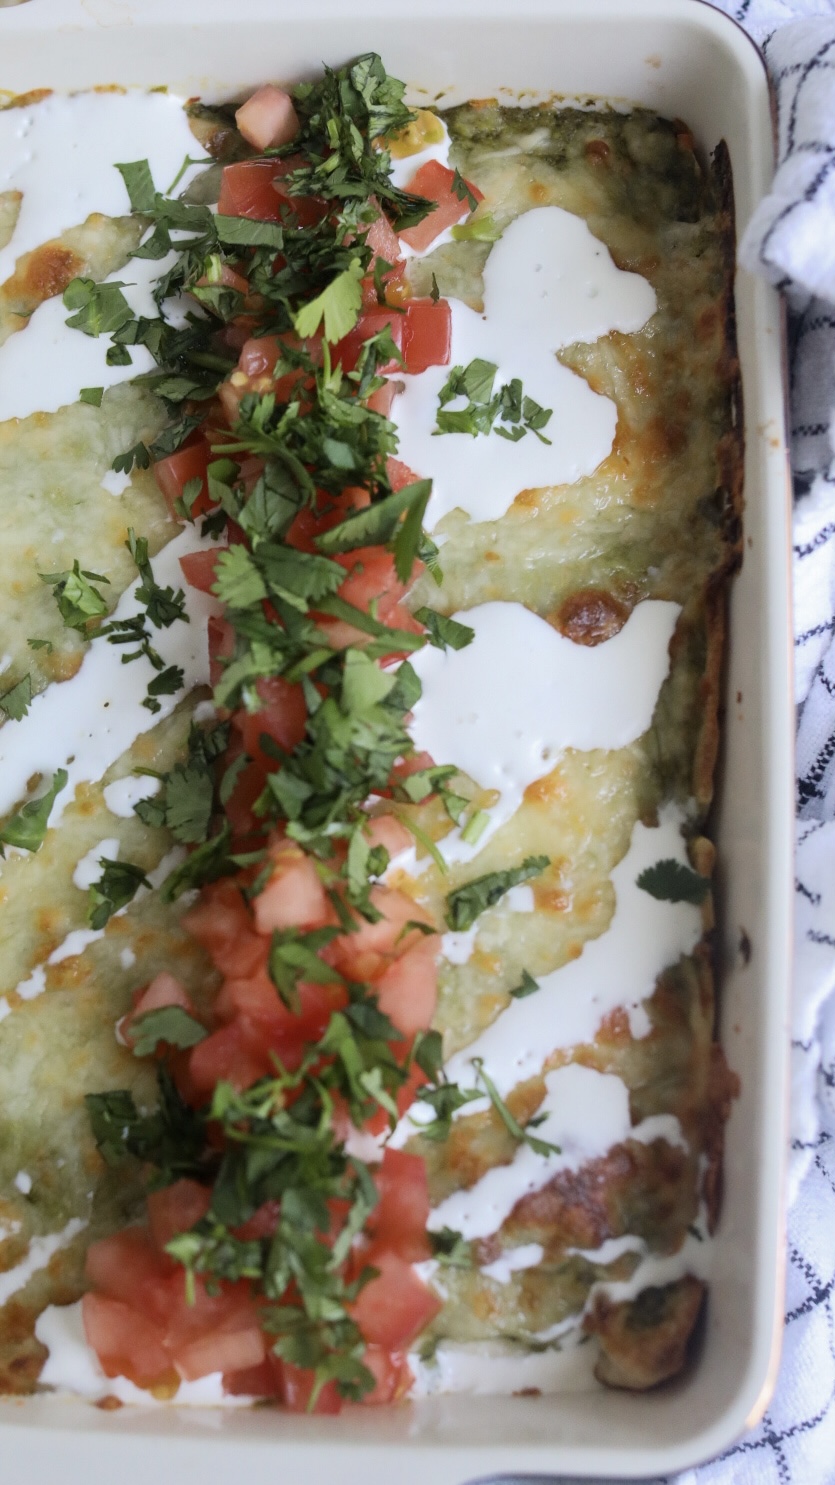 Chicken enchiladas with green sauce (poblano sauce), topped with gooey white cheese, sour cream, tomatoes and cilantro.